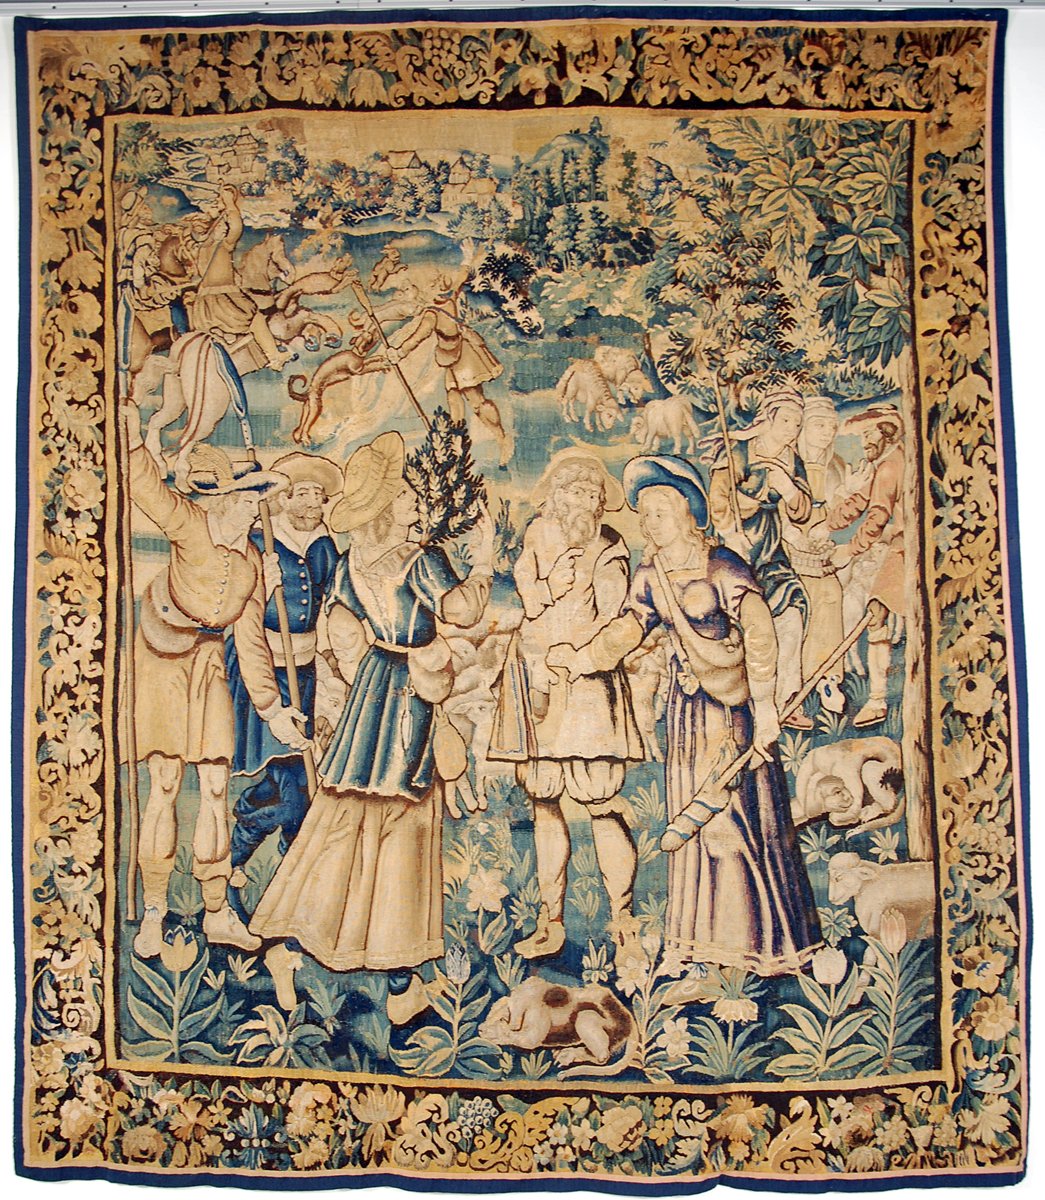 A Fine French 17th Century Tapestry